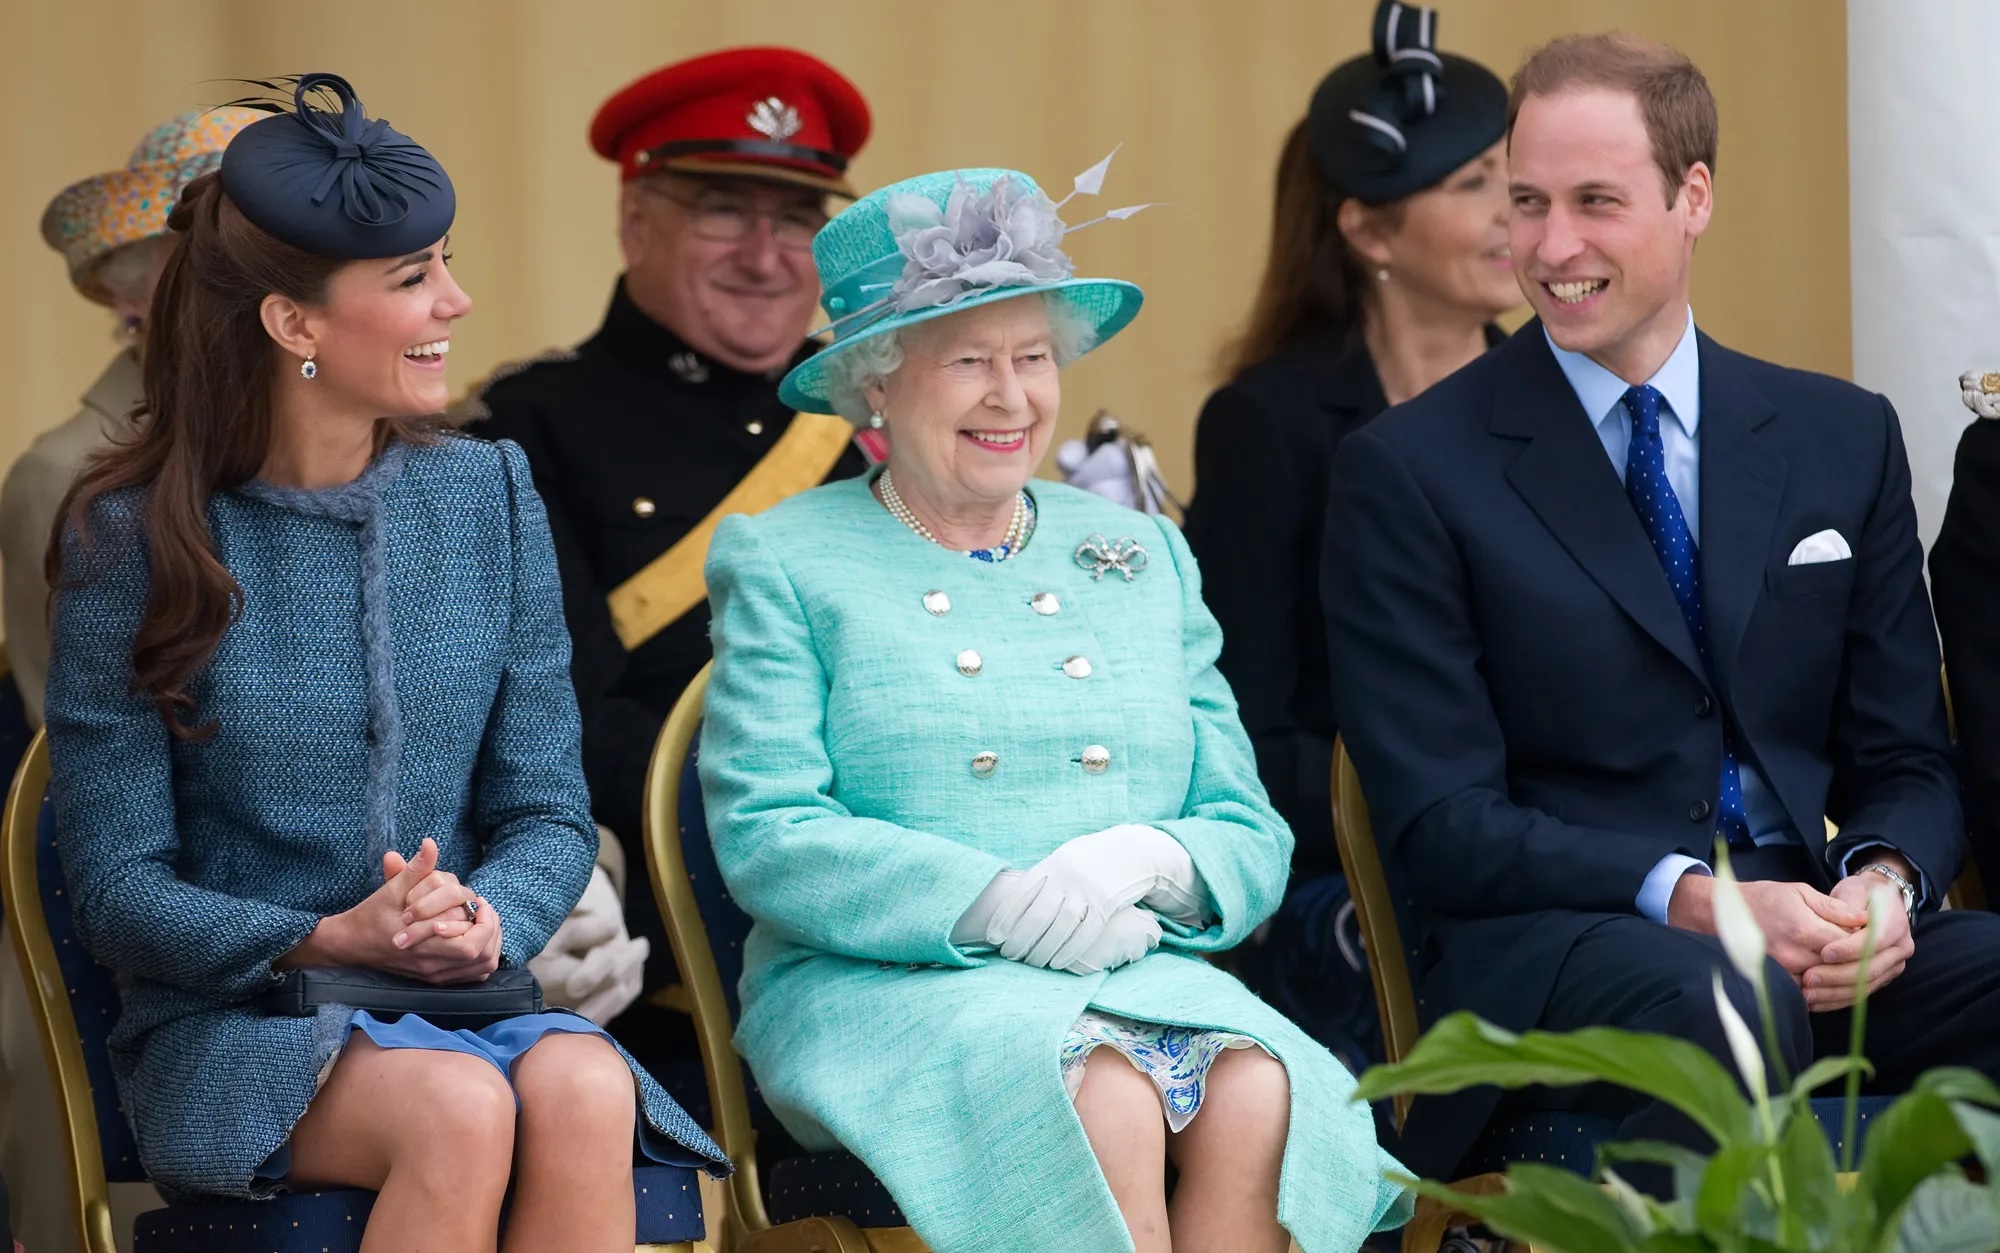 Prince William got it all: He got the Lion share from Queen Elizabeth